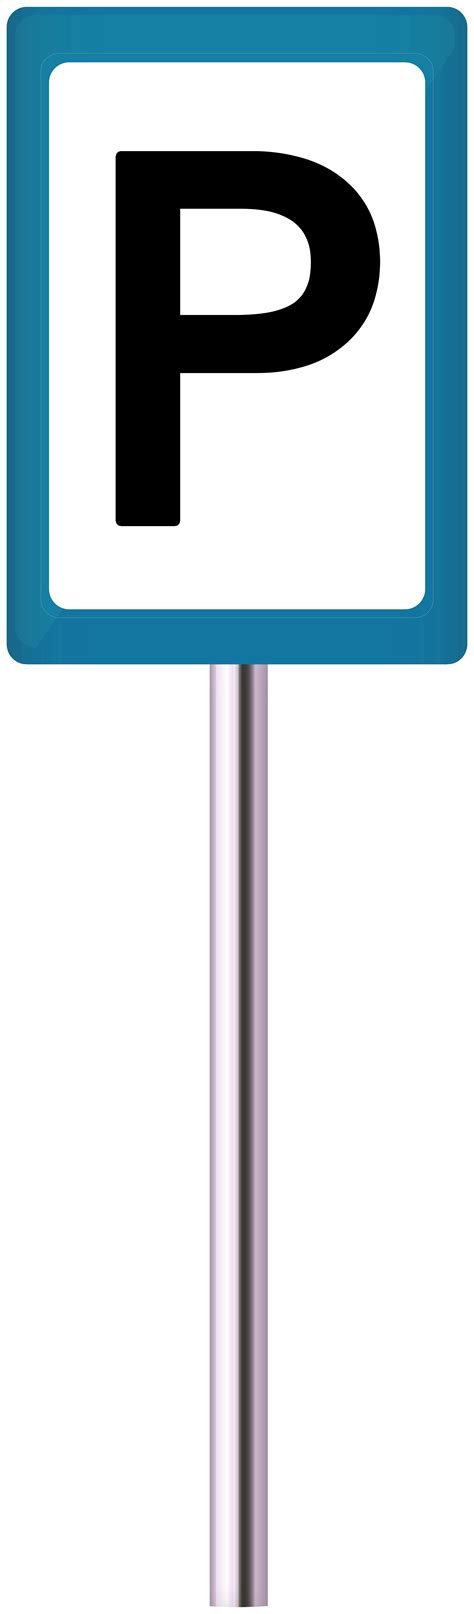 Event Parking Sign Clipart